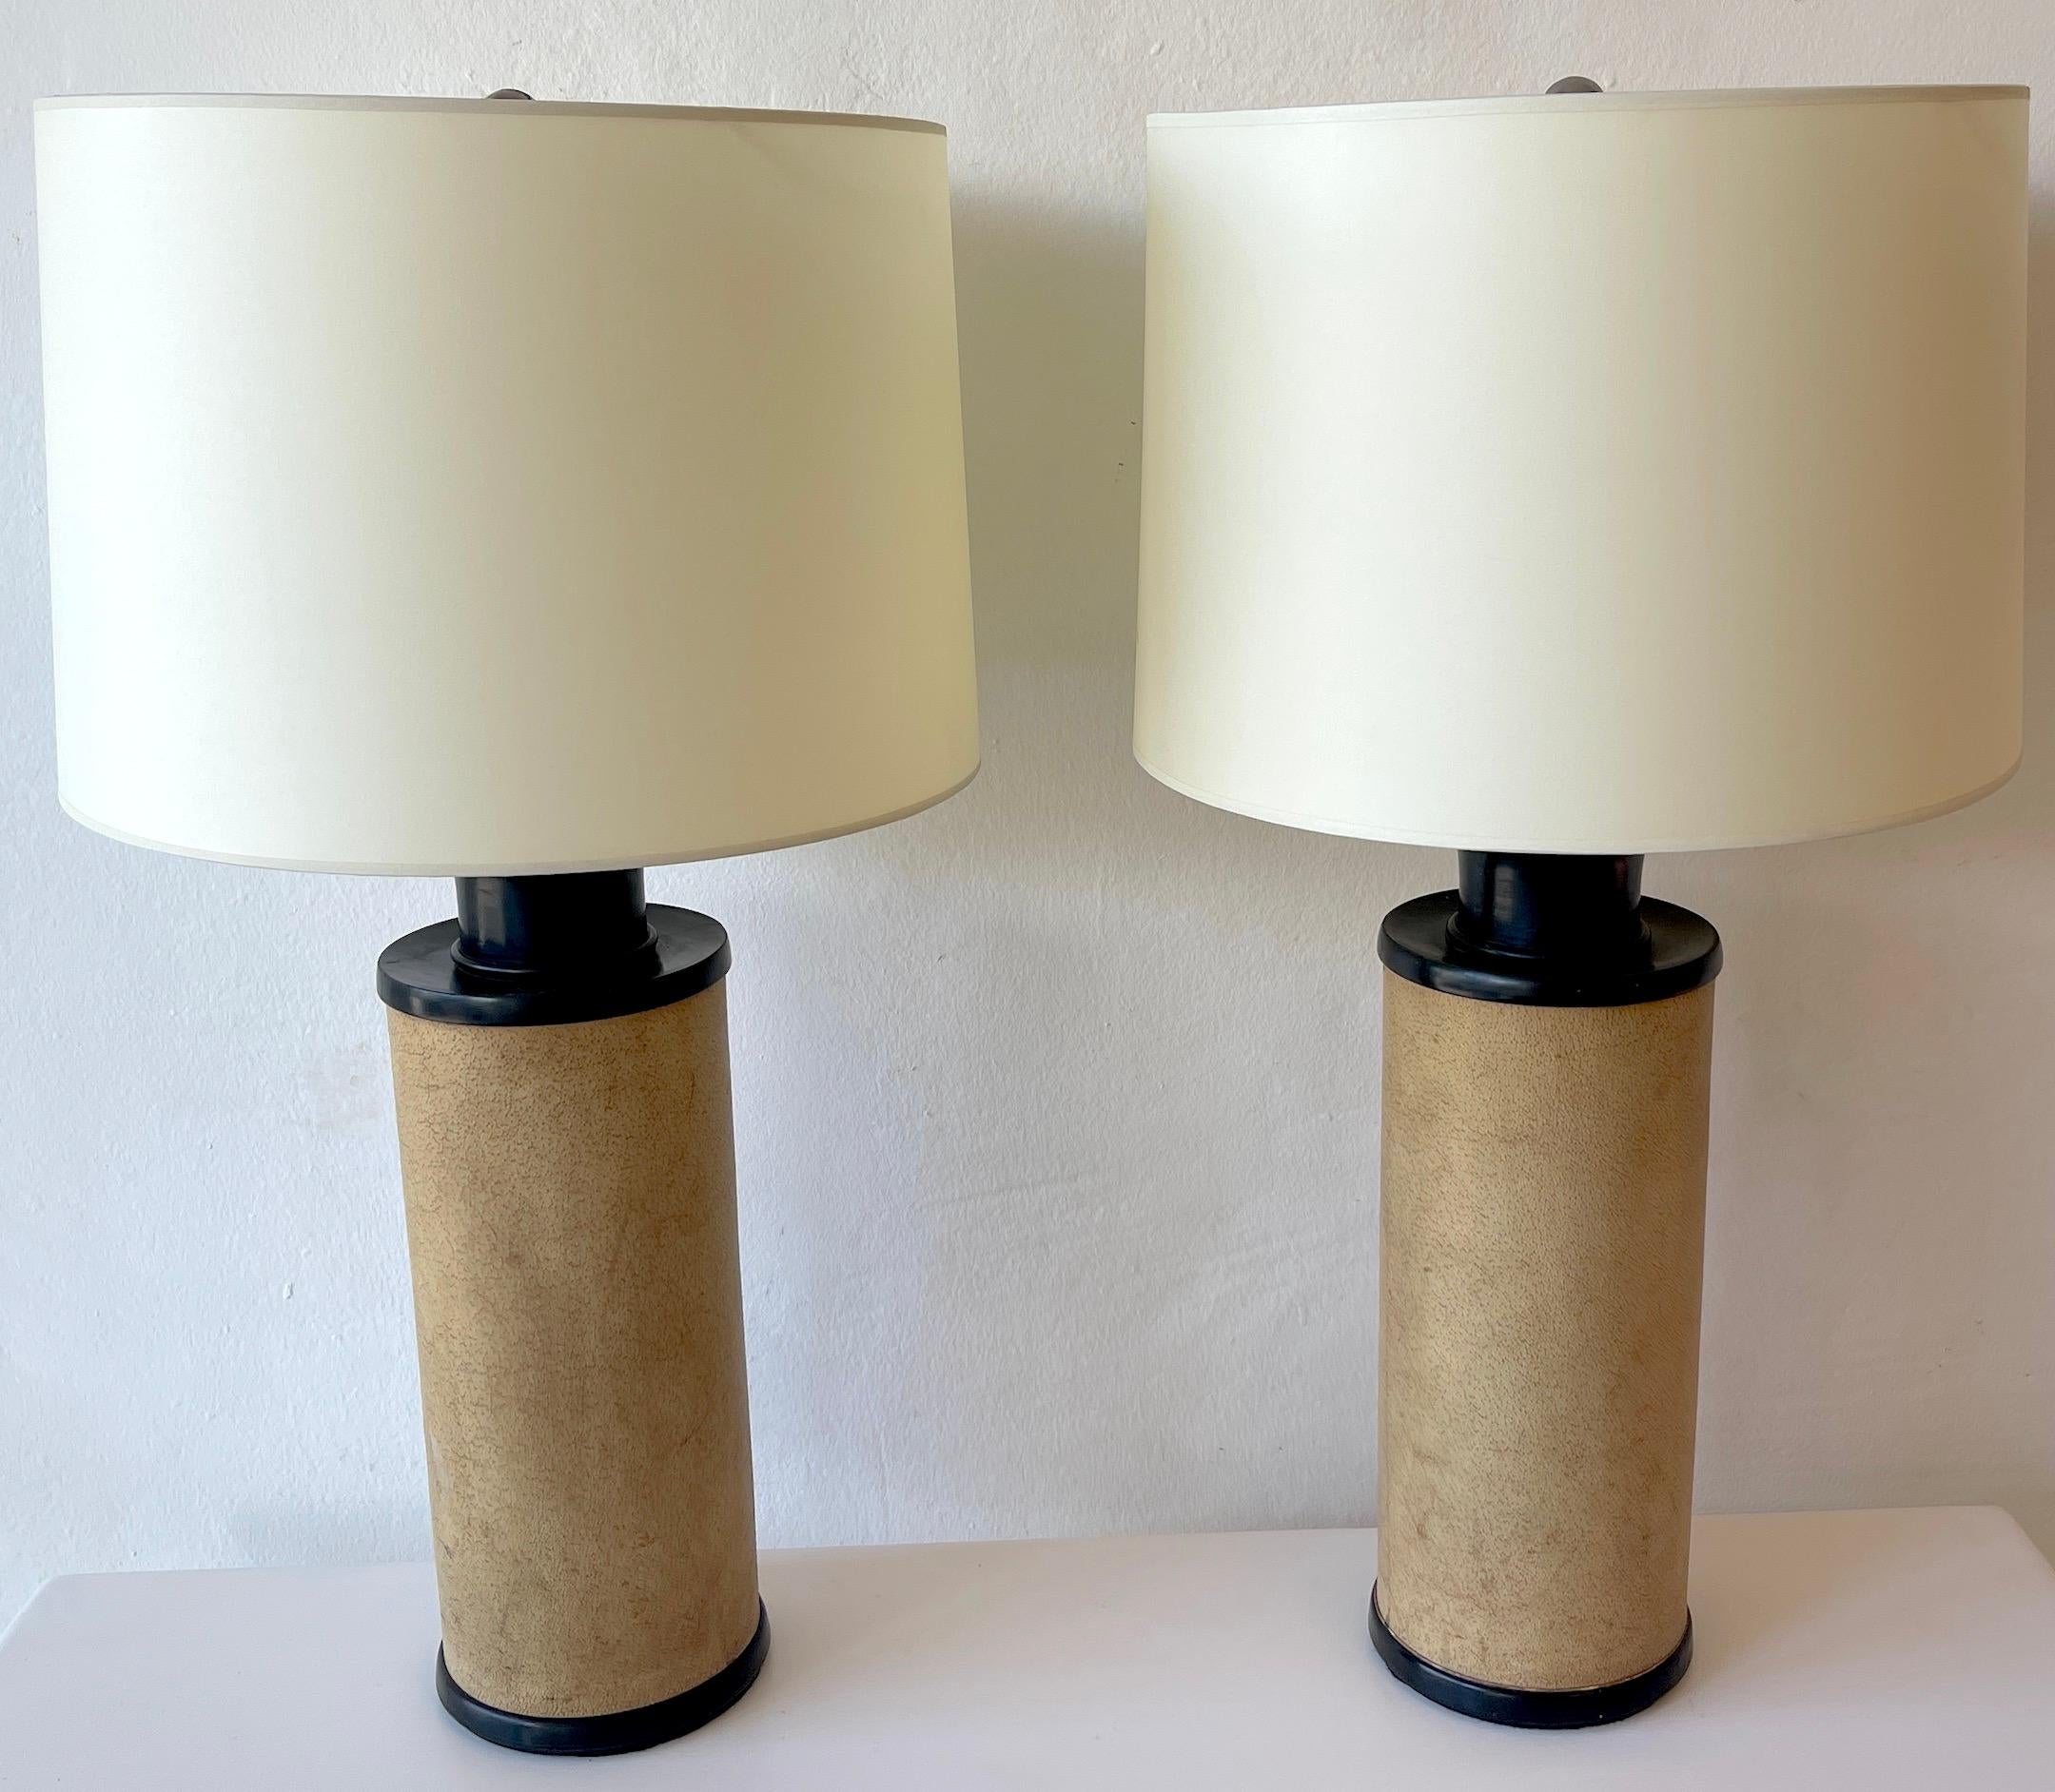 Pair of French modern ebonized wood & parchment leather lamps, style of JMF 
(Jean-Michel Frank 1895-1941)
Each one of cylinder column form with carved and ebonized mounts, the center with specimen parchment leather with beautiful patina. Fitted